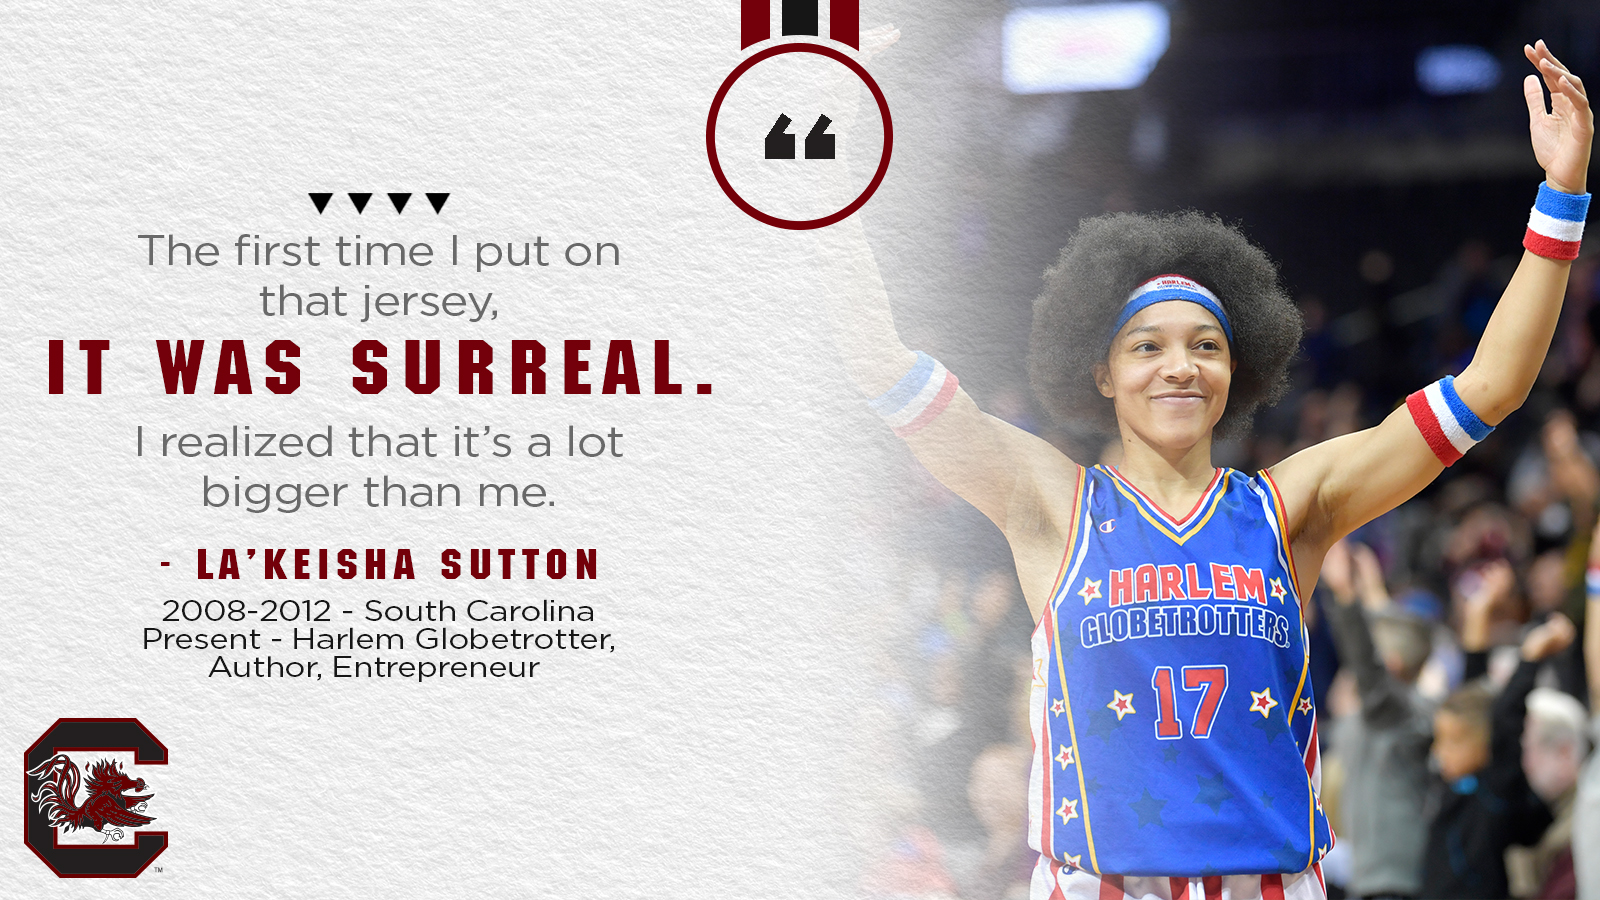 Former Gamecock La'Keisha Sutton is Now a Globetrotter and Author